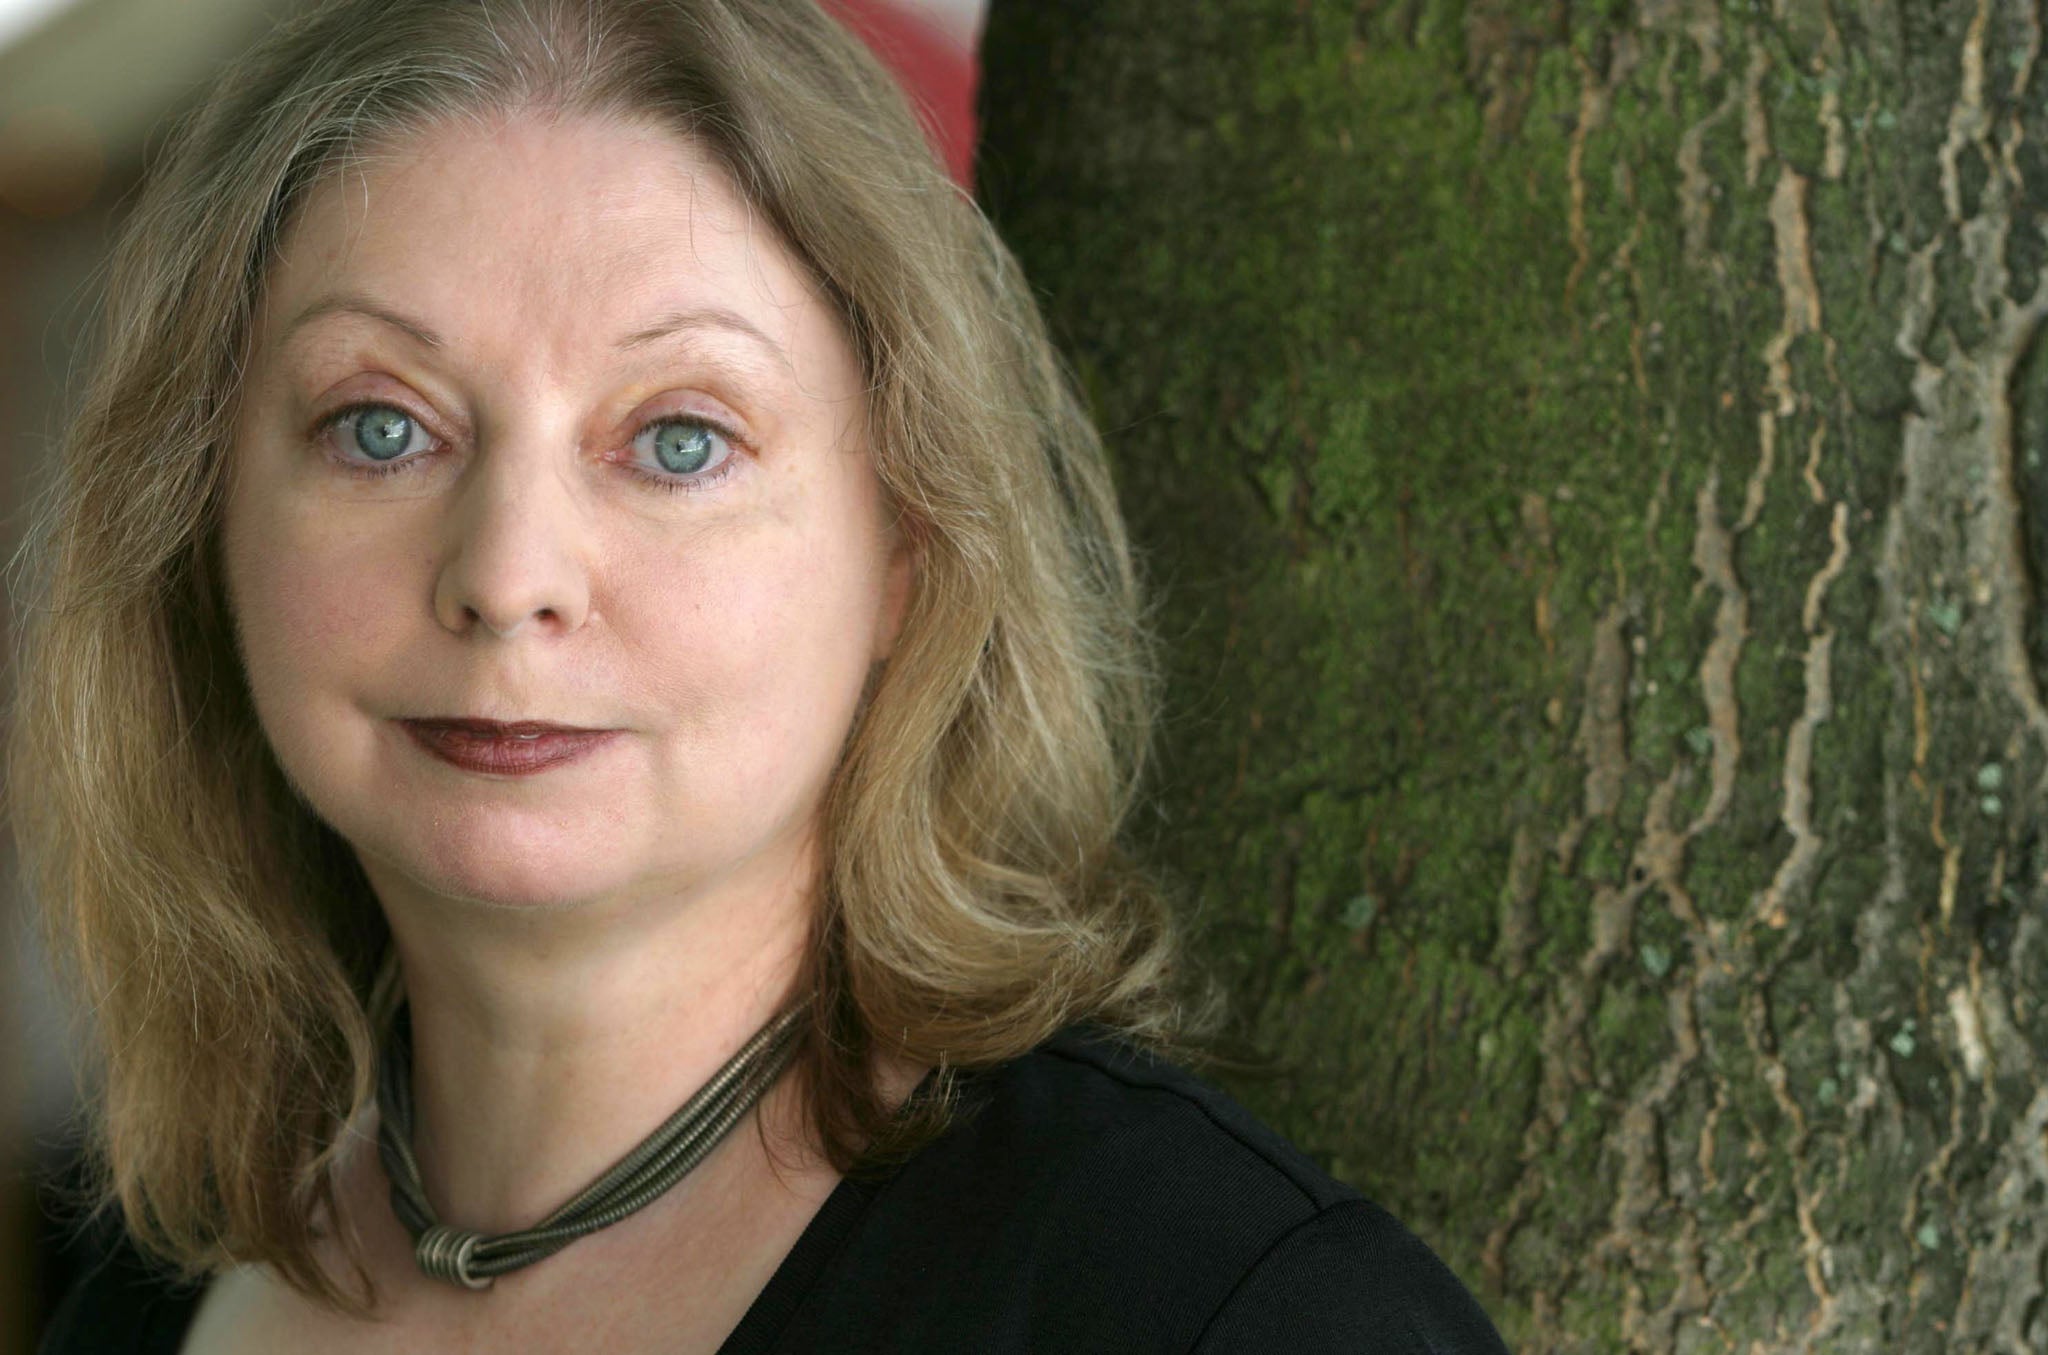 Hilary Mantel has been called "sick and deranged" for her Margaret Thatcher assassination fantasy